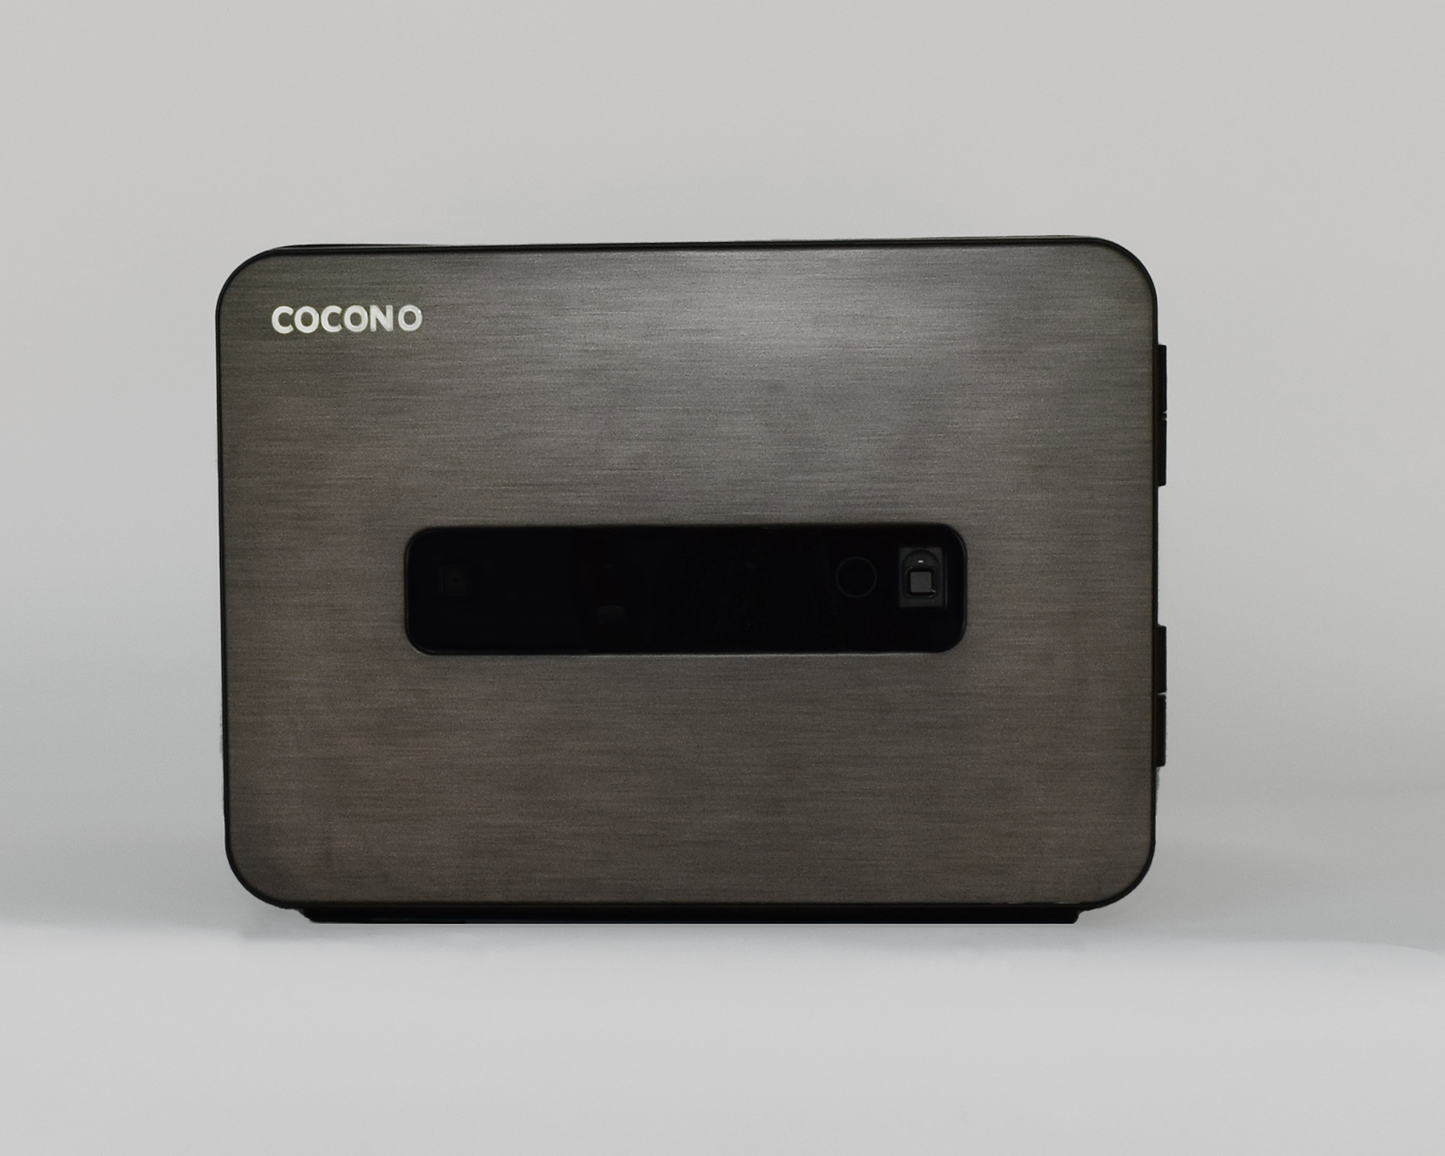 Photo of a modern, compact, graphite 20 liter Cocono safe for secure storage and organization.